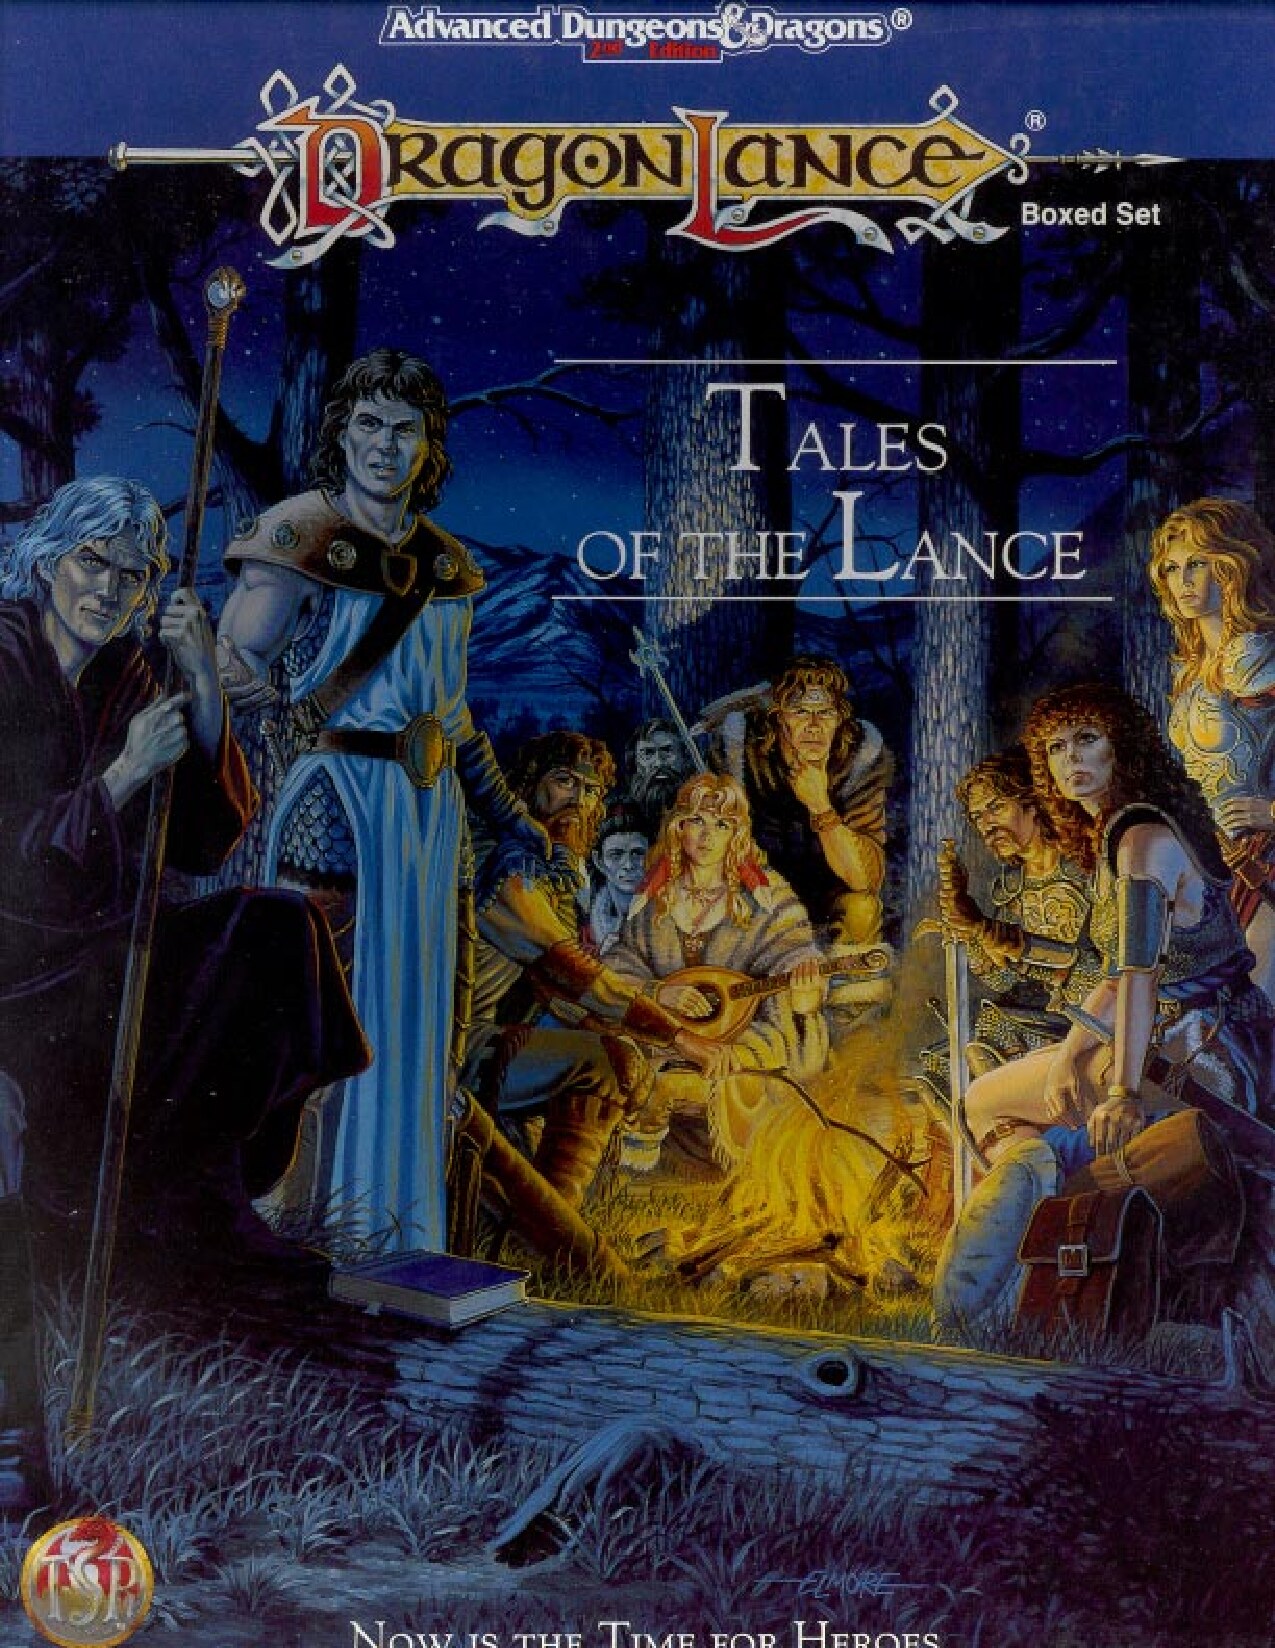 Tales of the Lance